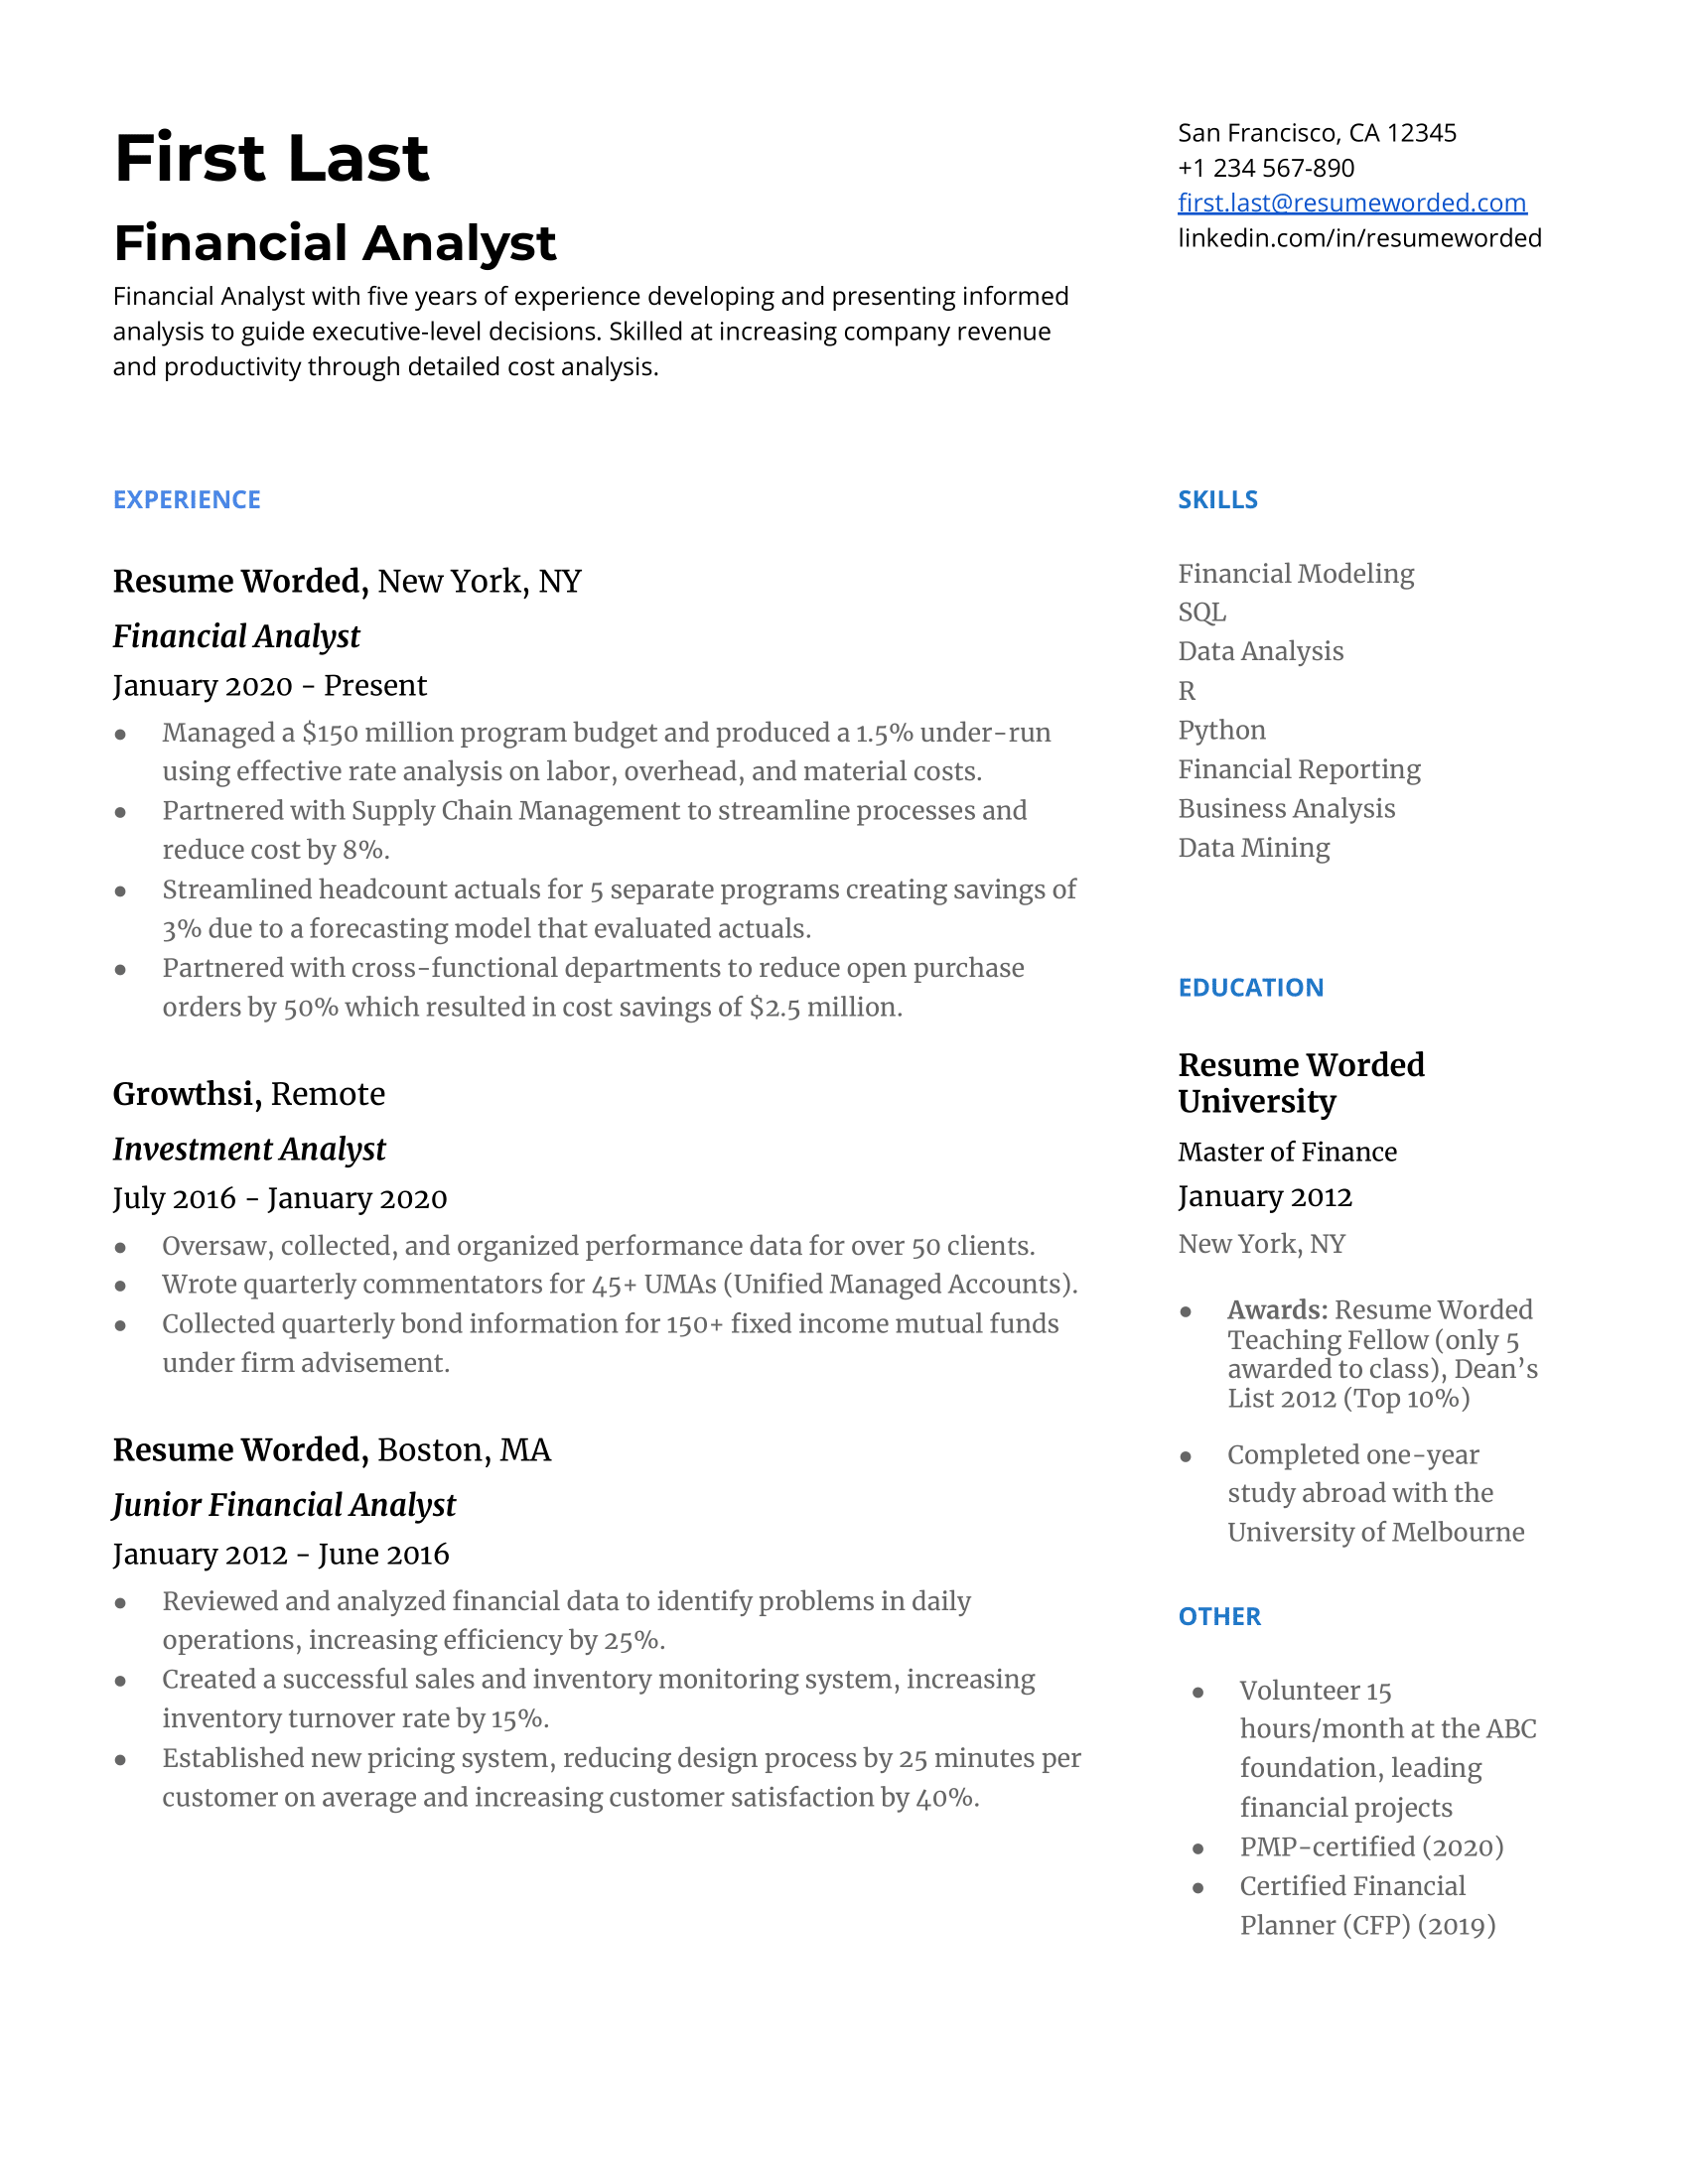 Financial Analyst CV showcasing quantifiable achievements and software proficiency.